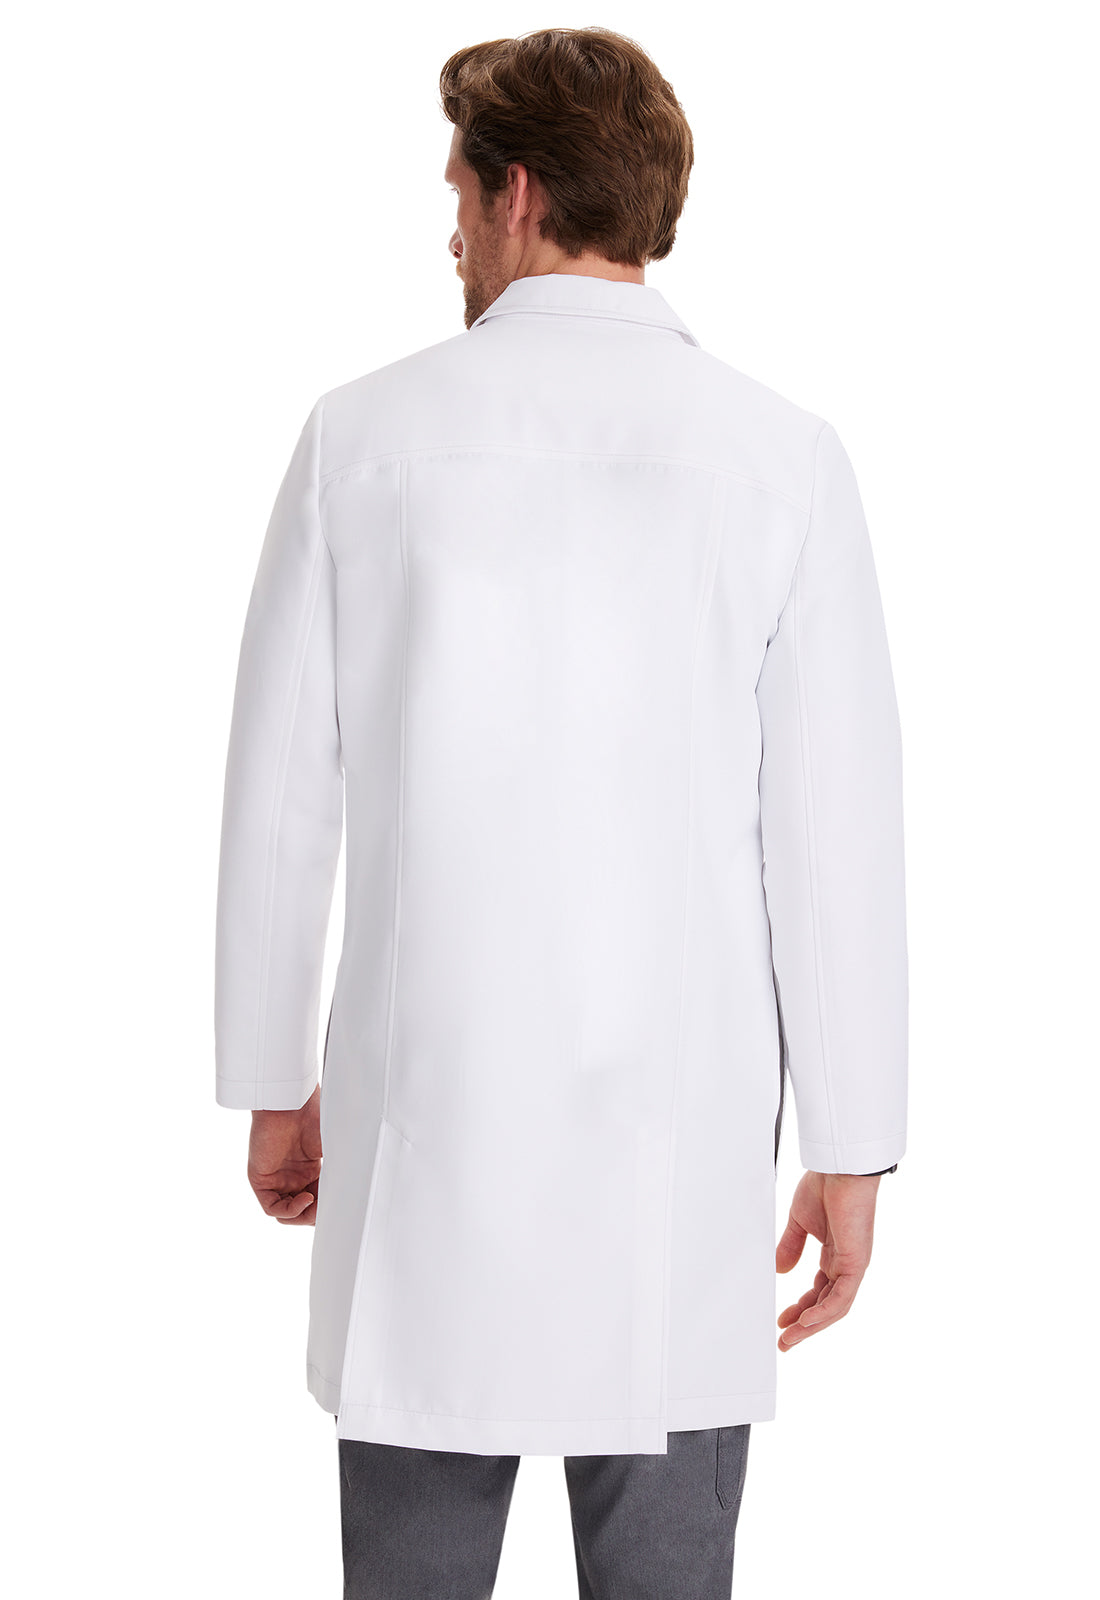 Healing Hands Lyndon Labcoat in White